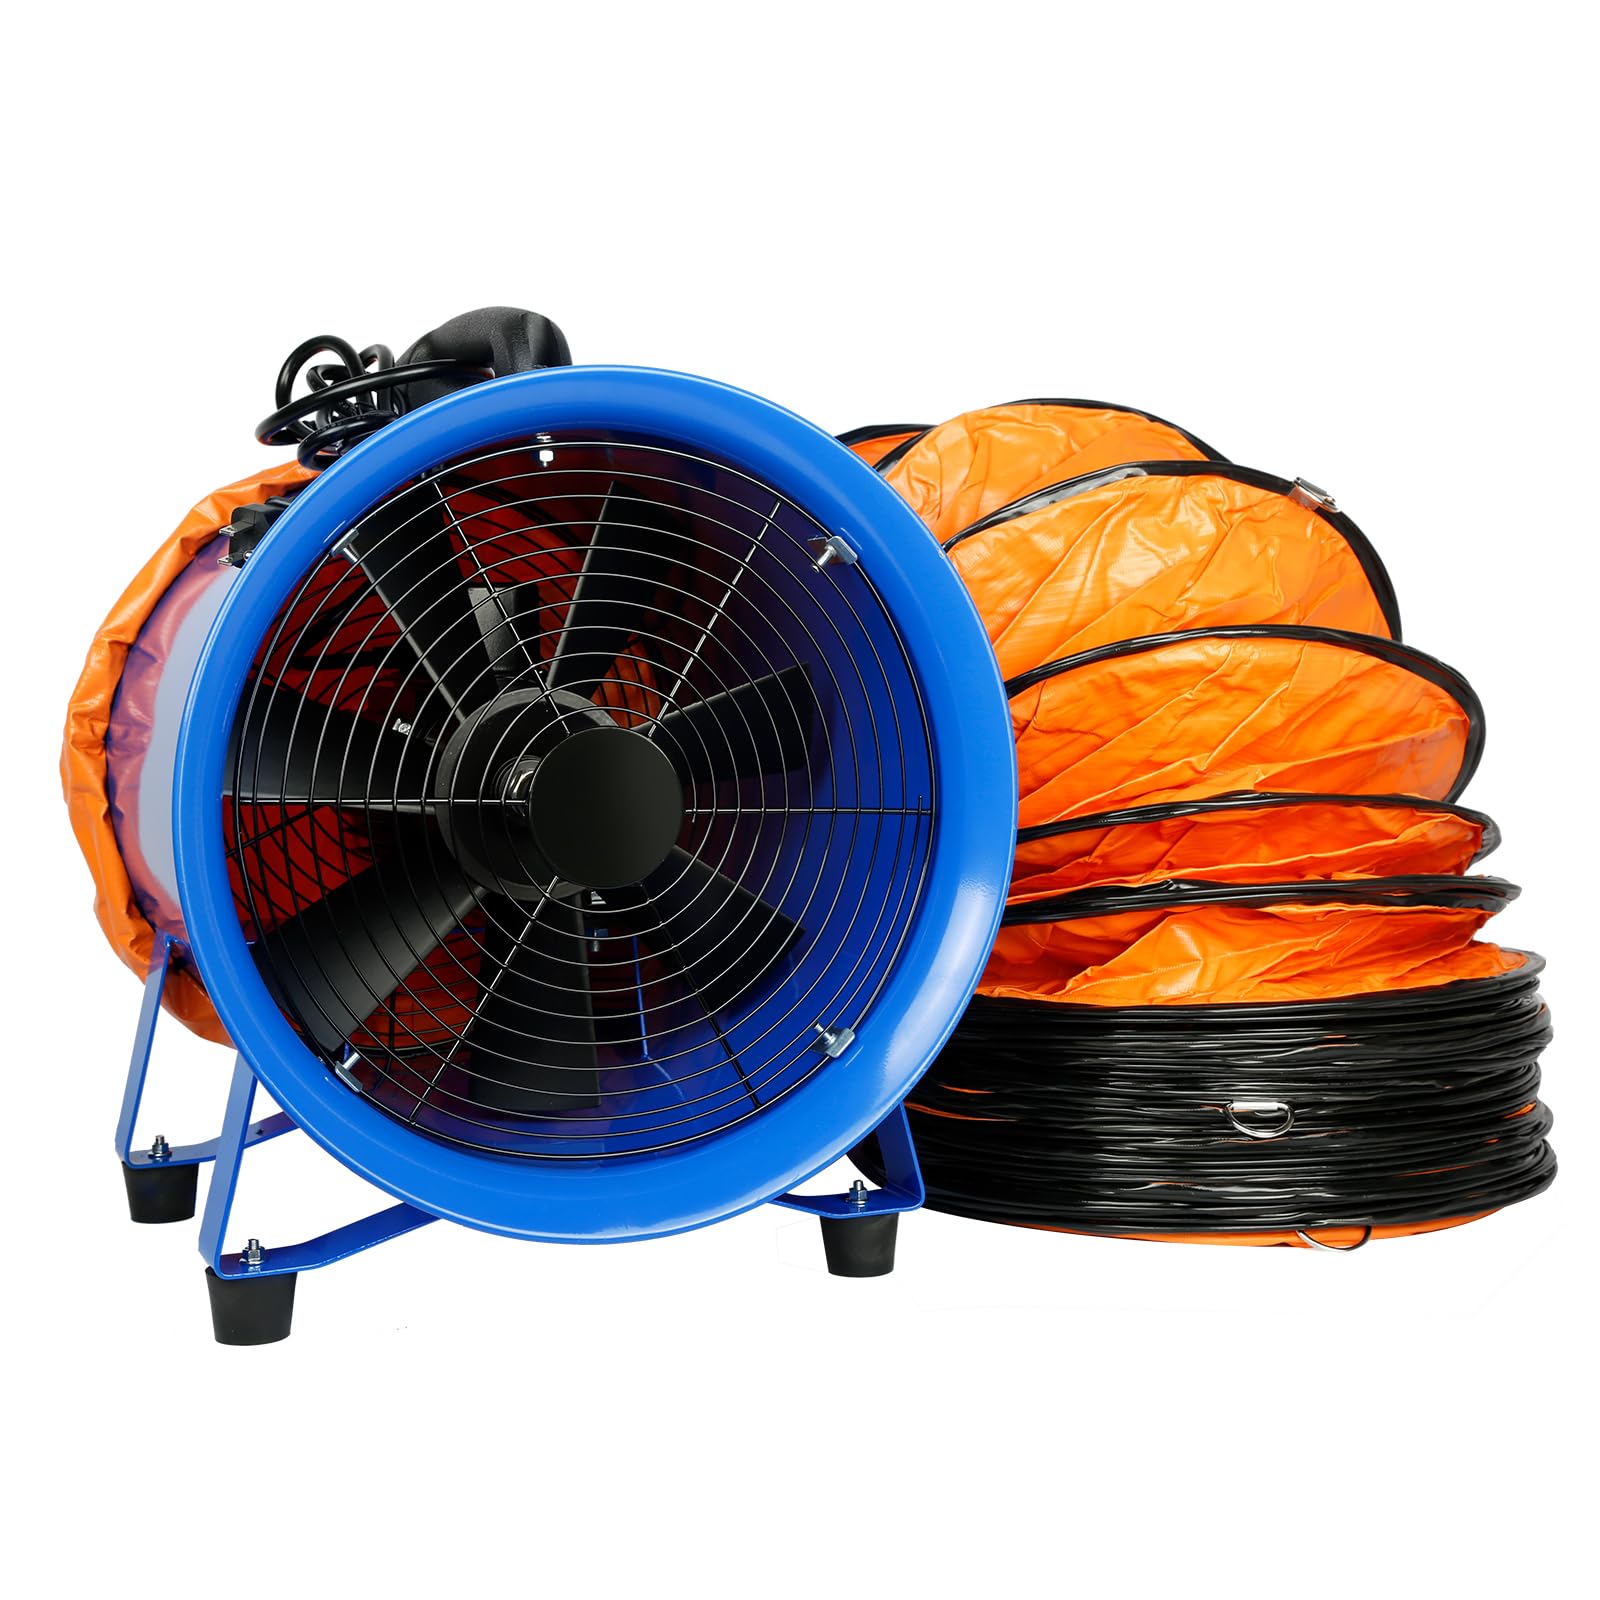 WARSUN Utility Blower 520W 12inch Exhaust Axial Fan 4100 m3/h High Velocity Portable Extractor Fan with 33Ft Duct Hose Portable Ventilator for Exhausting & Ventilating at Home or Workplace 370PA